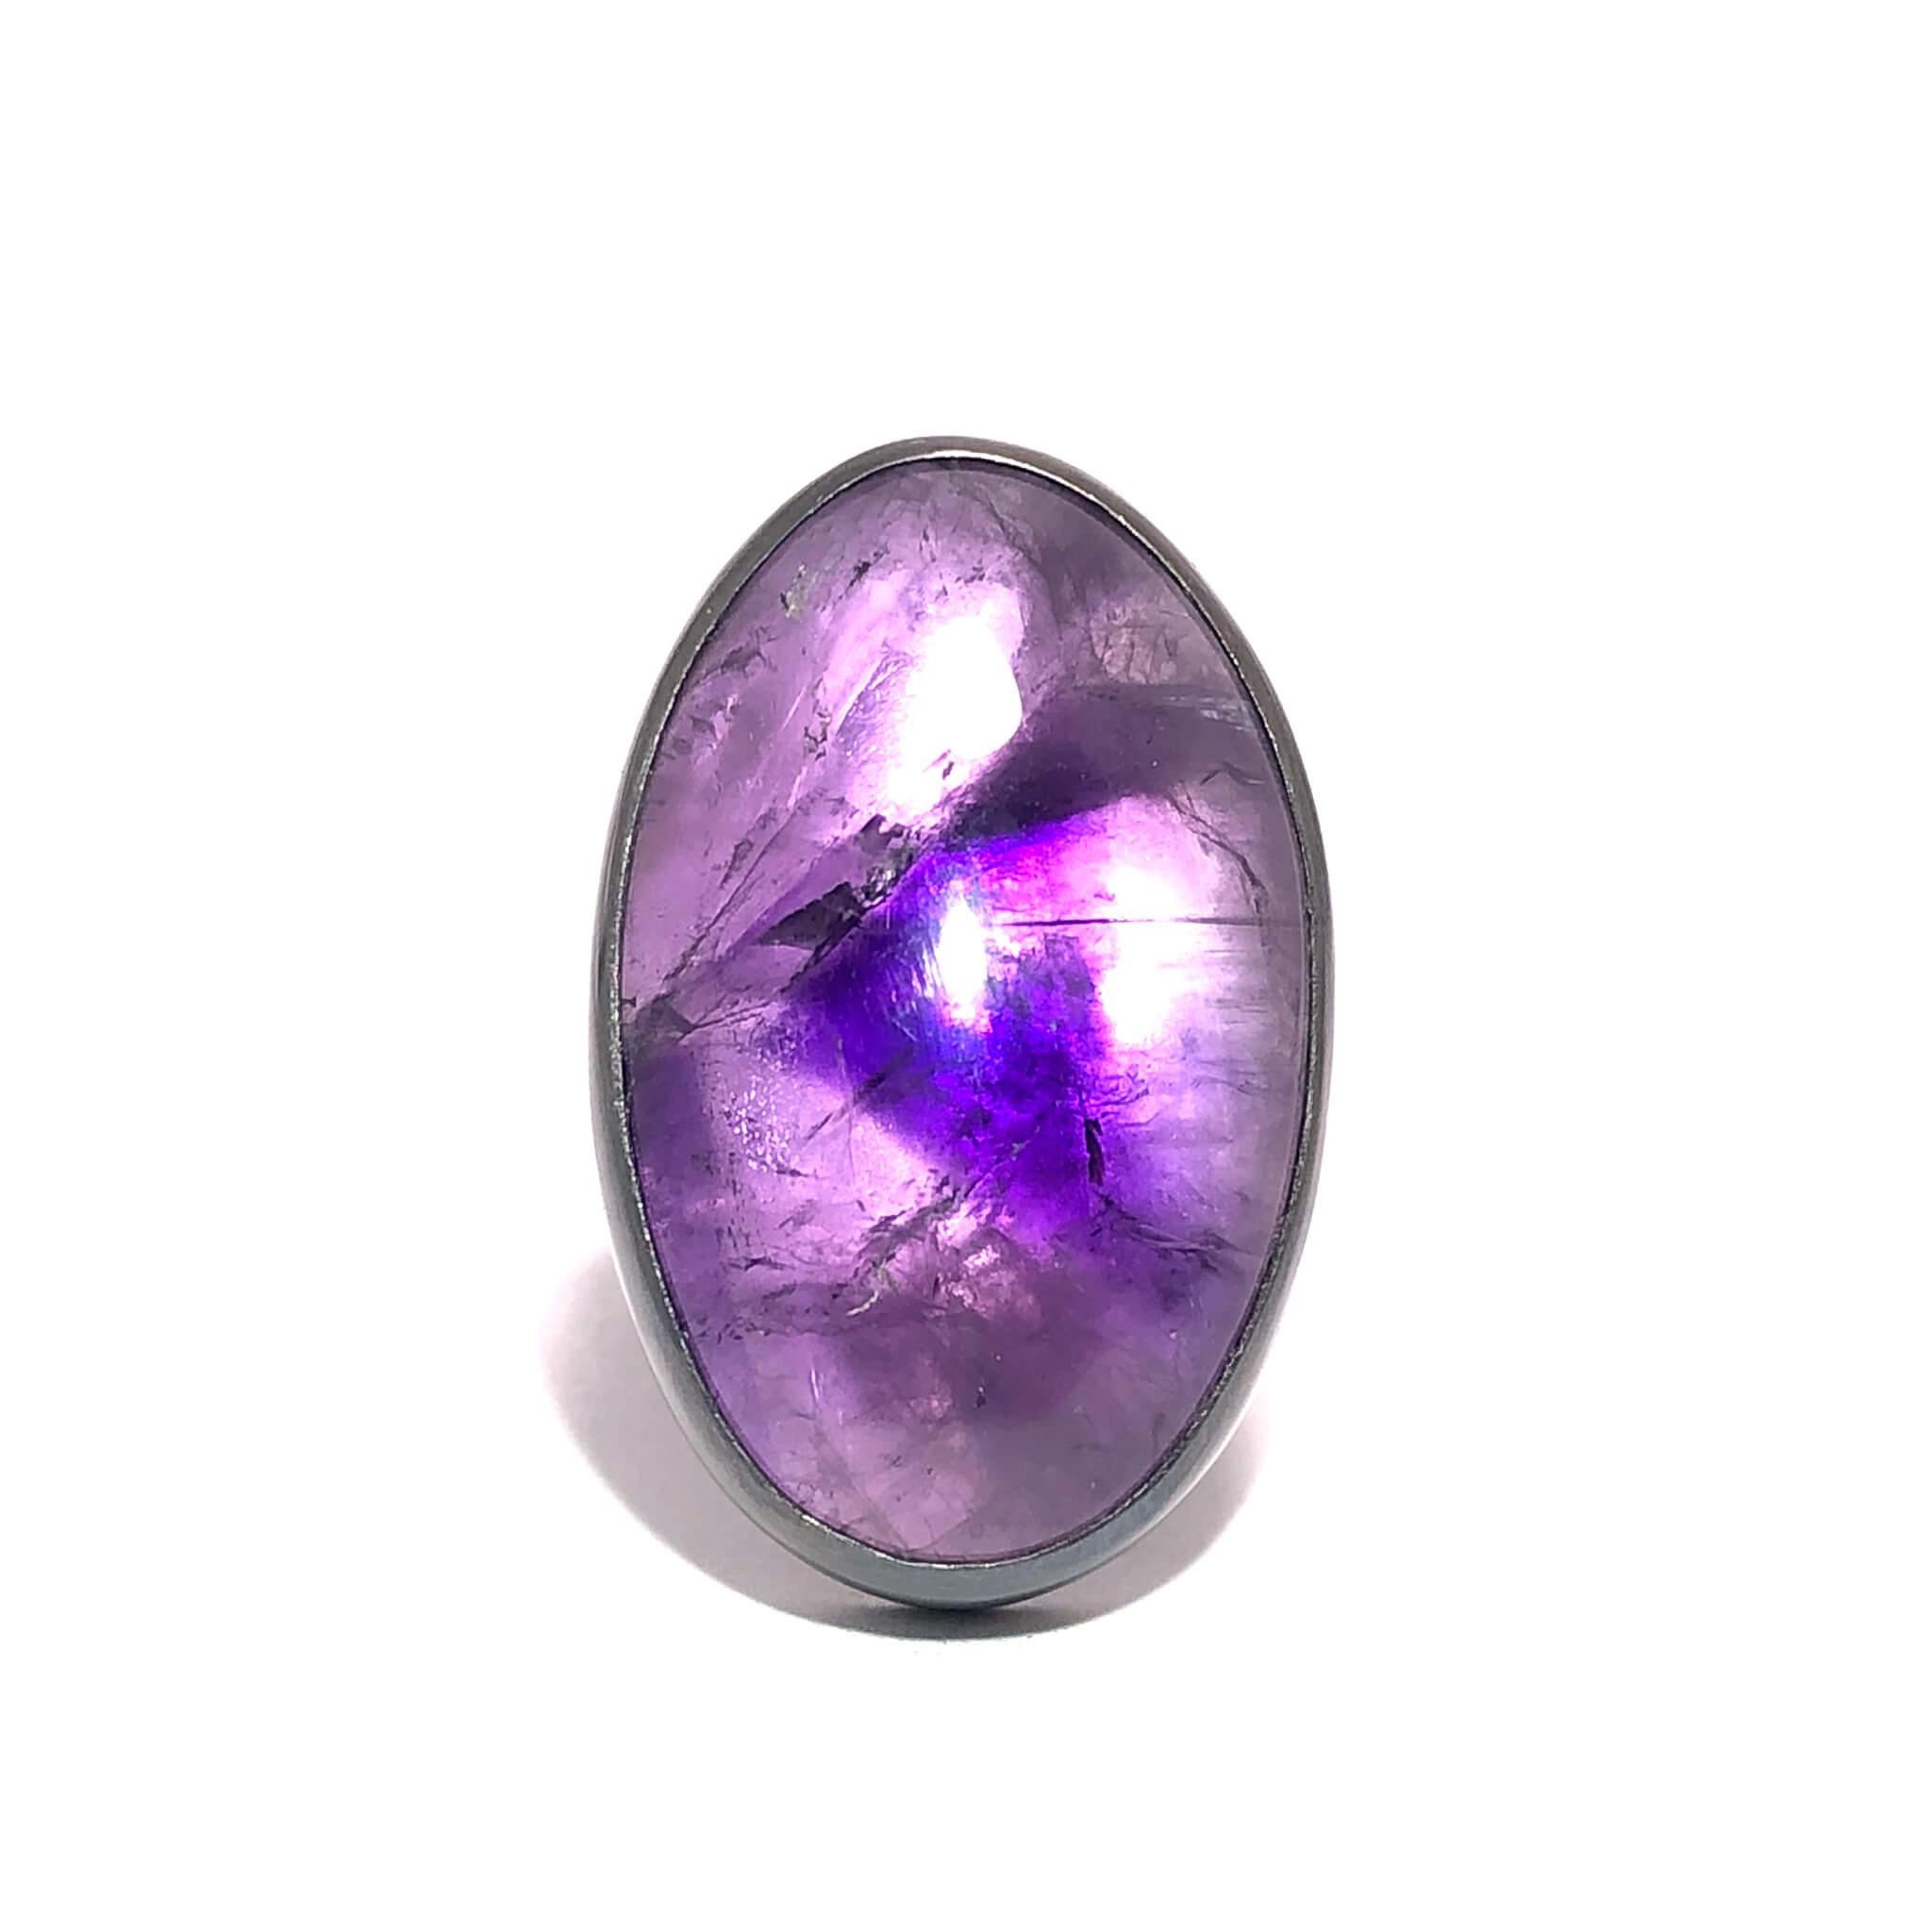 Amethyst Amulet Ring.  Season of the Witch collection by Alex Lozier Jewelry.